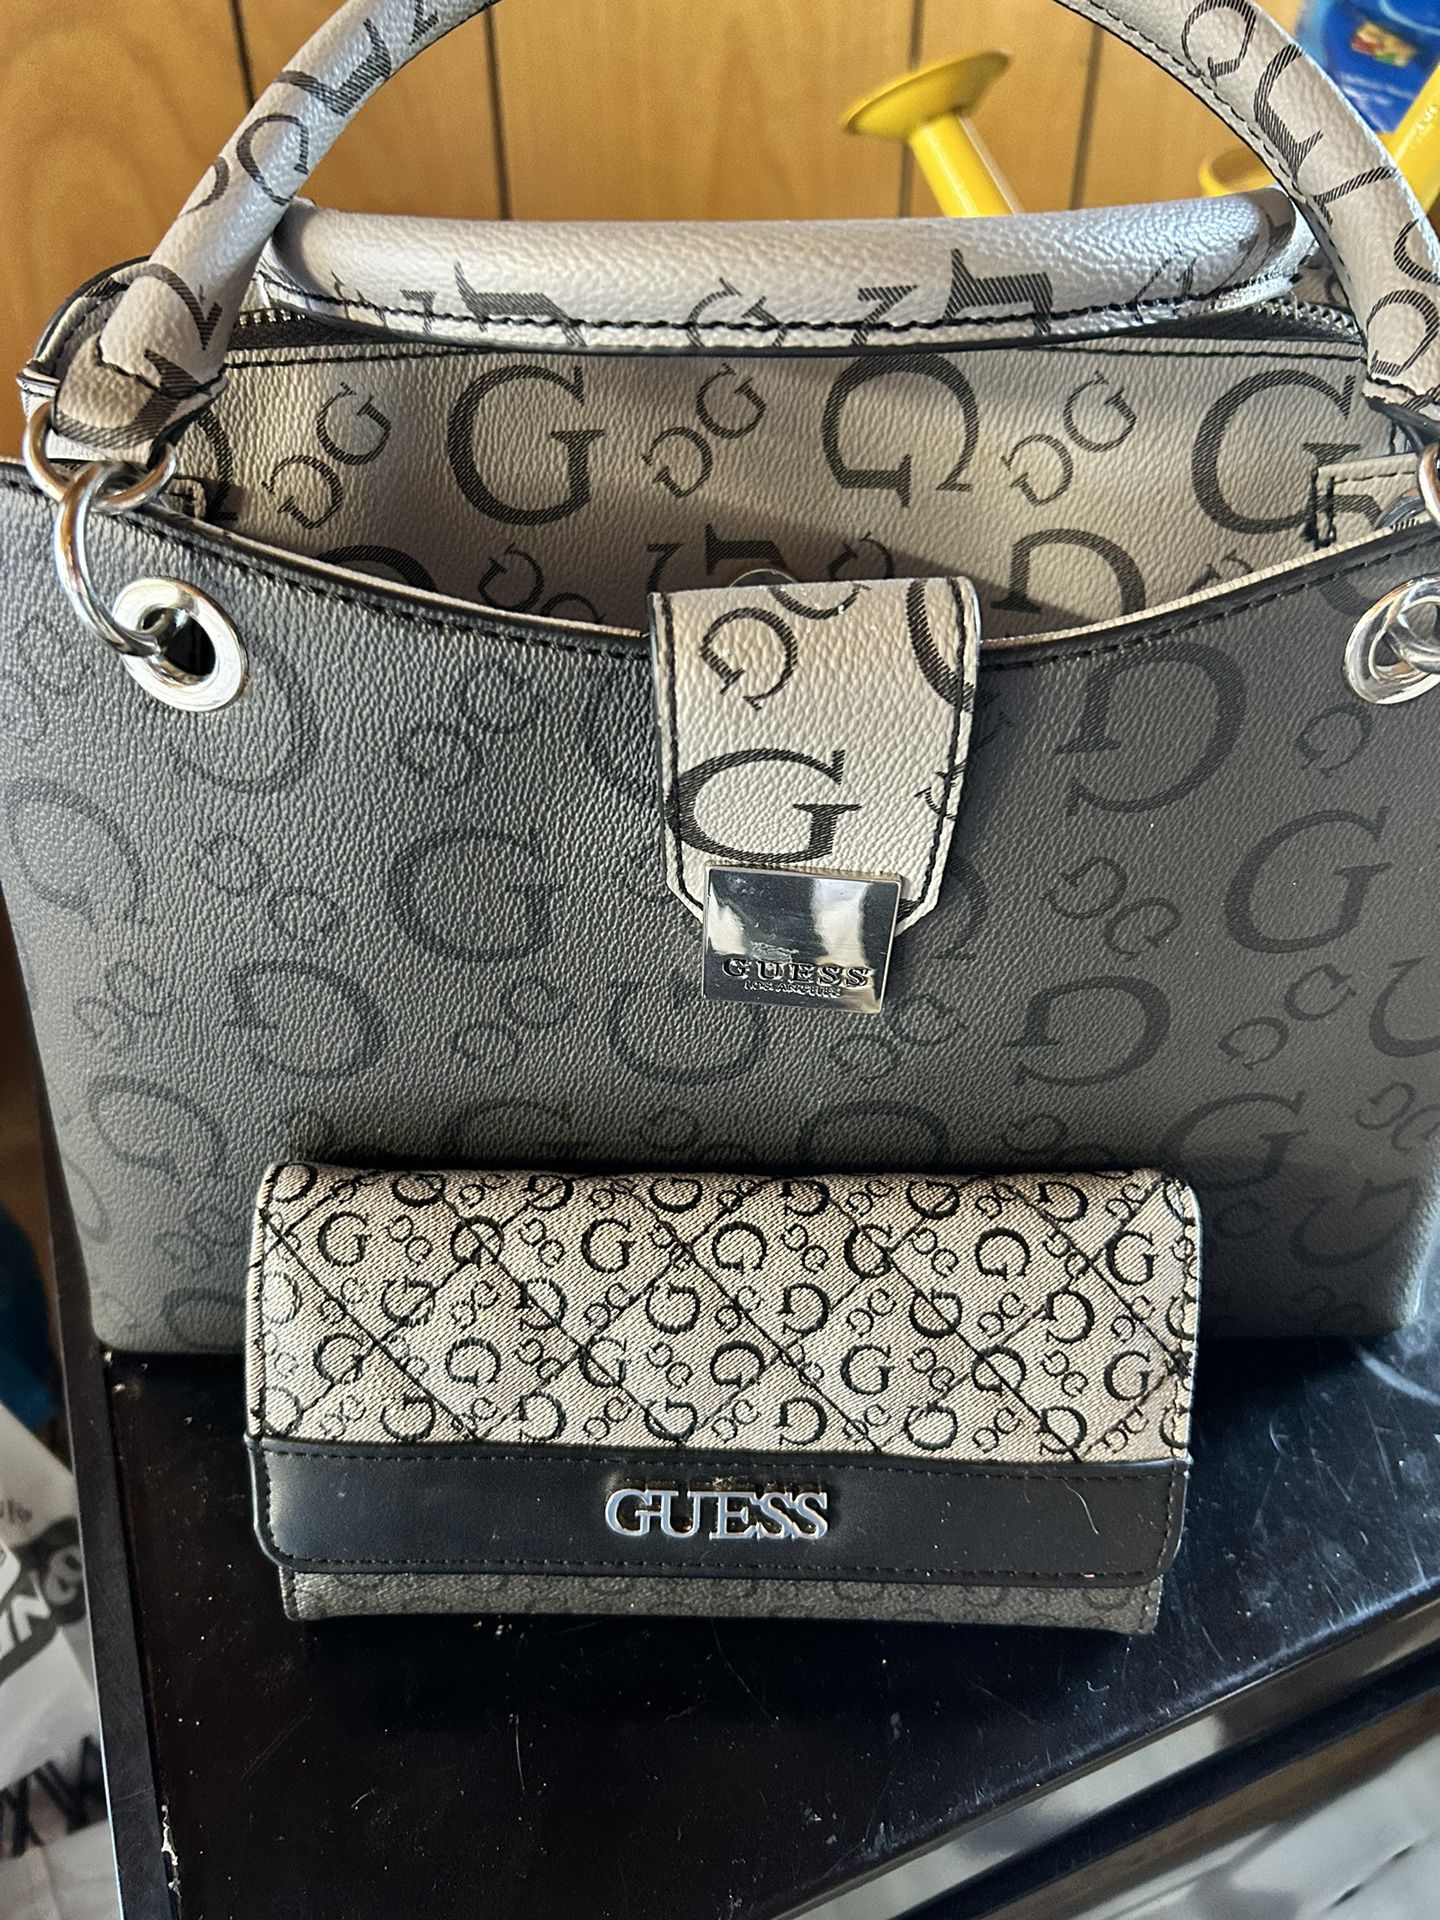 Guess Purse And Matching Wallet 